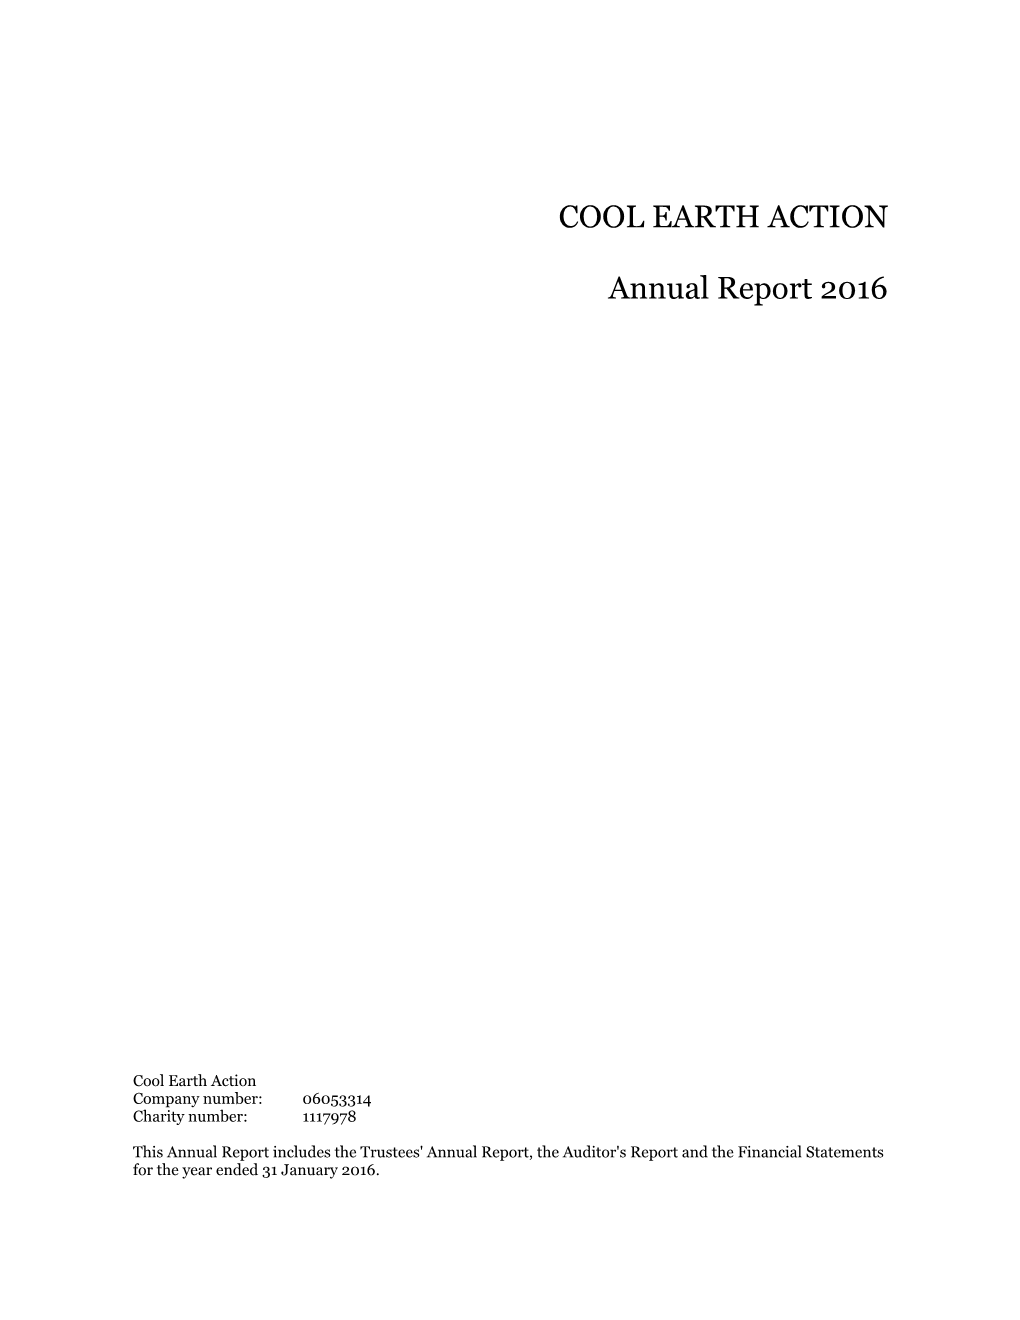 COOL EARTH ACTION Annual Report 2016